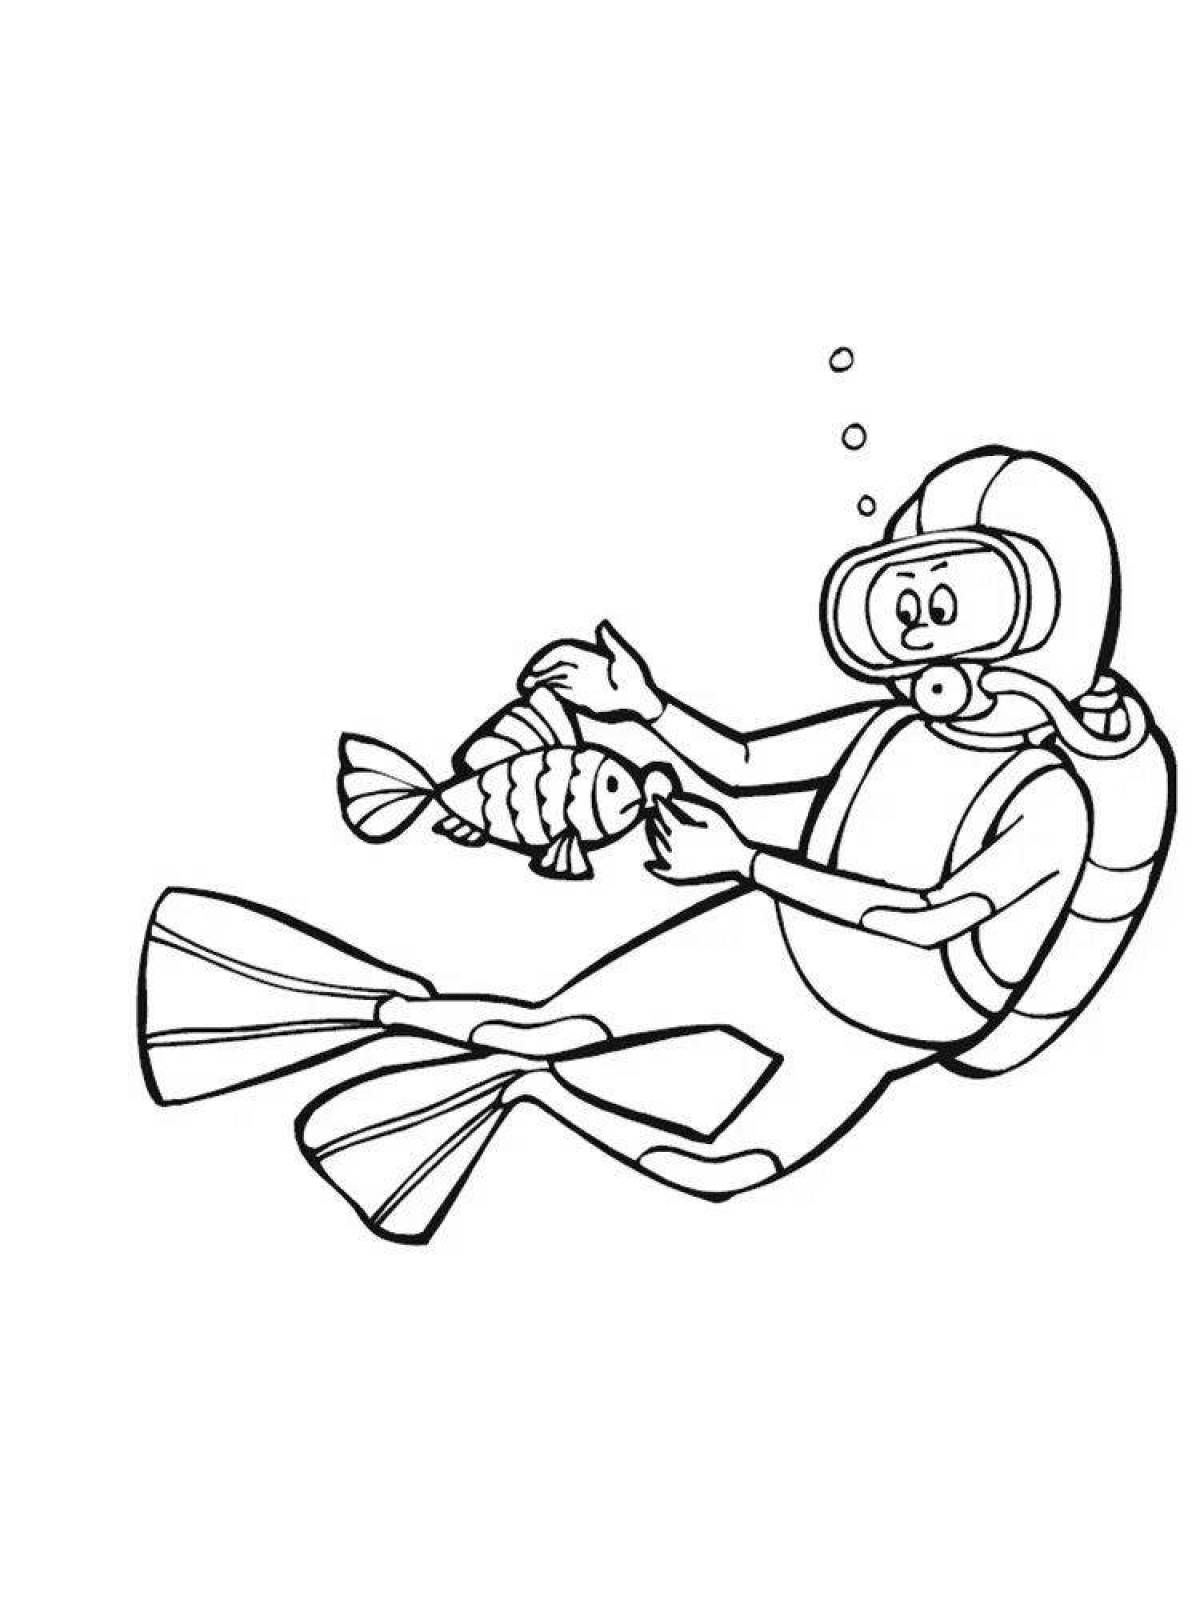 Coloring page spectacular diver